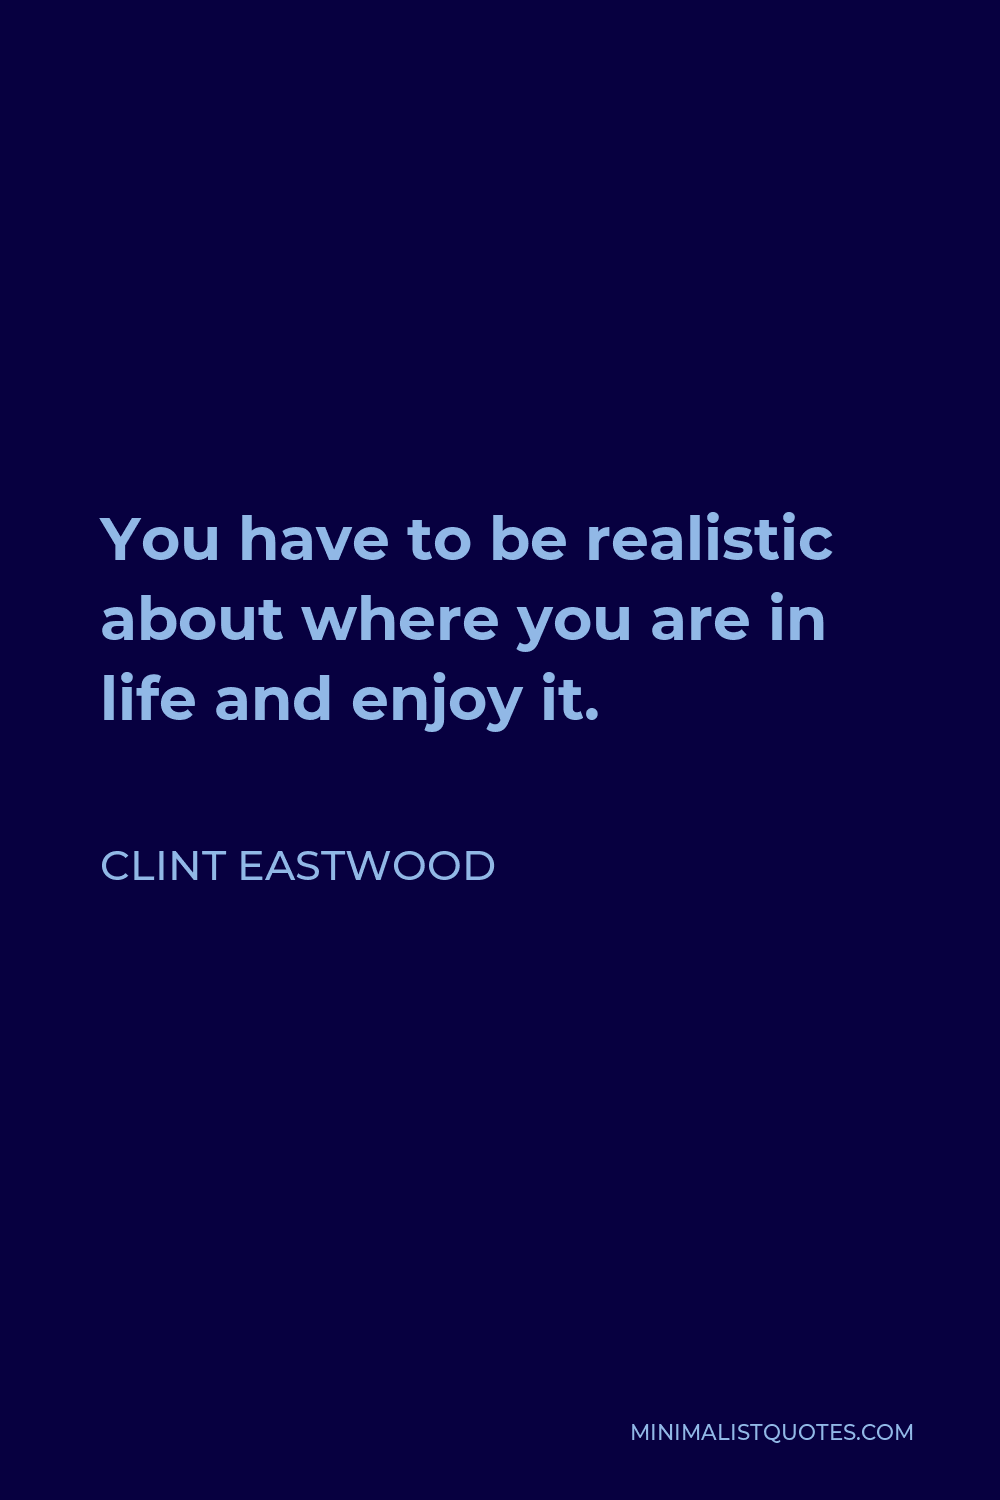 Clint Eastwood Quote - You have to be realistic about where you are in life and enjoy it.